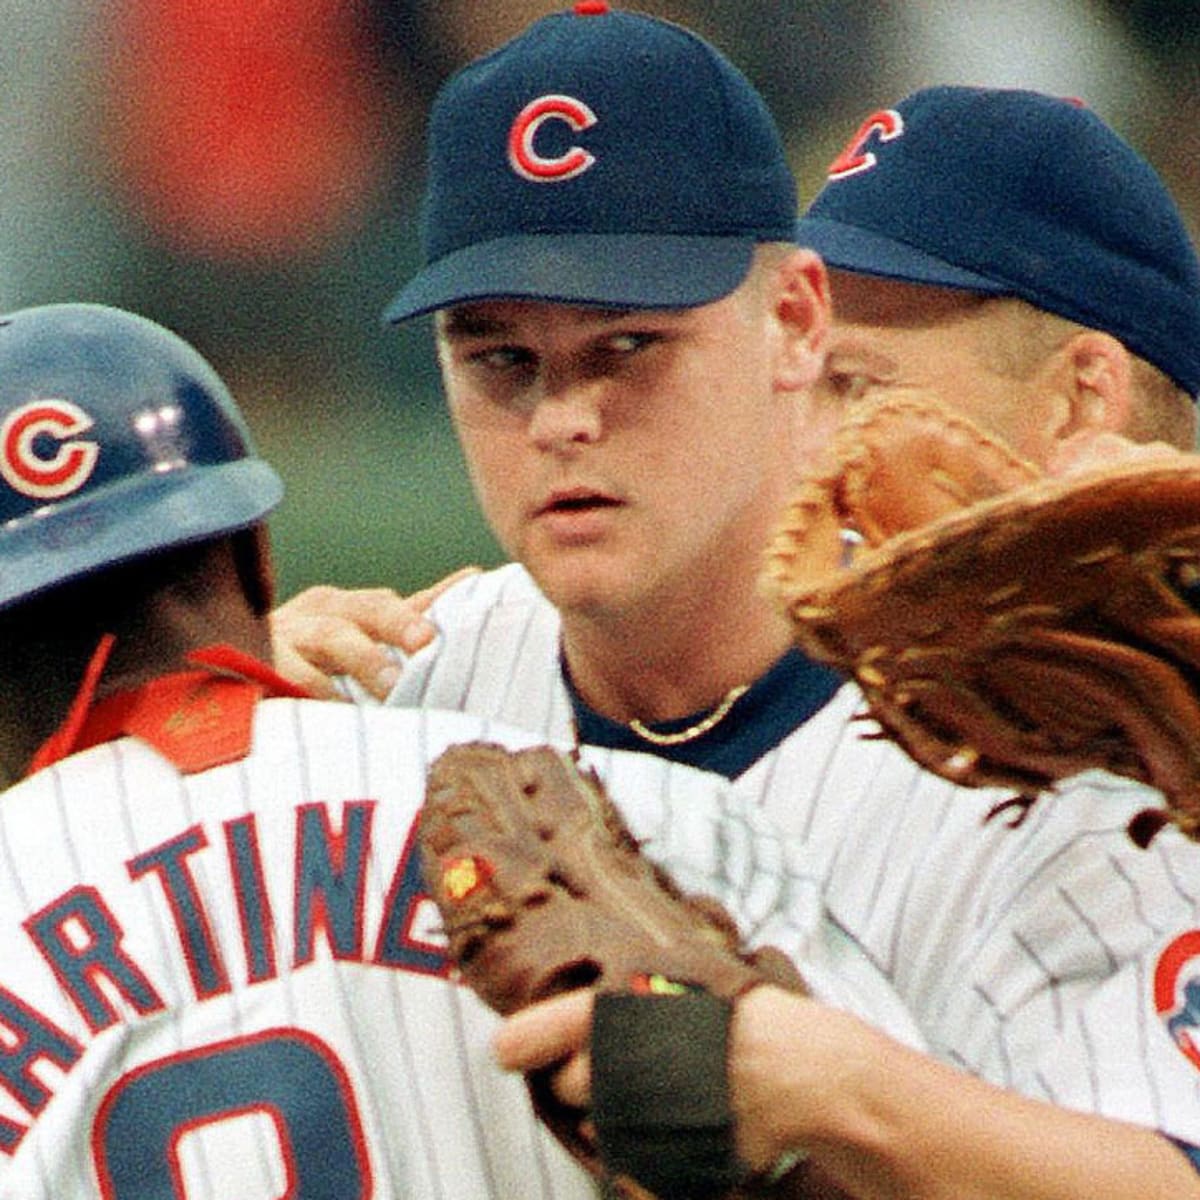 It's the 20th anniversary of Kerry Wood's 20-strikeout game